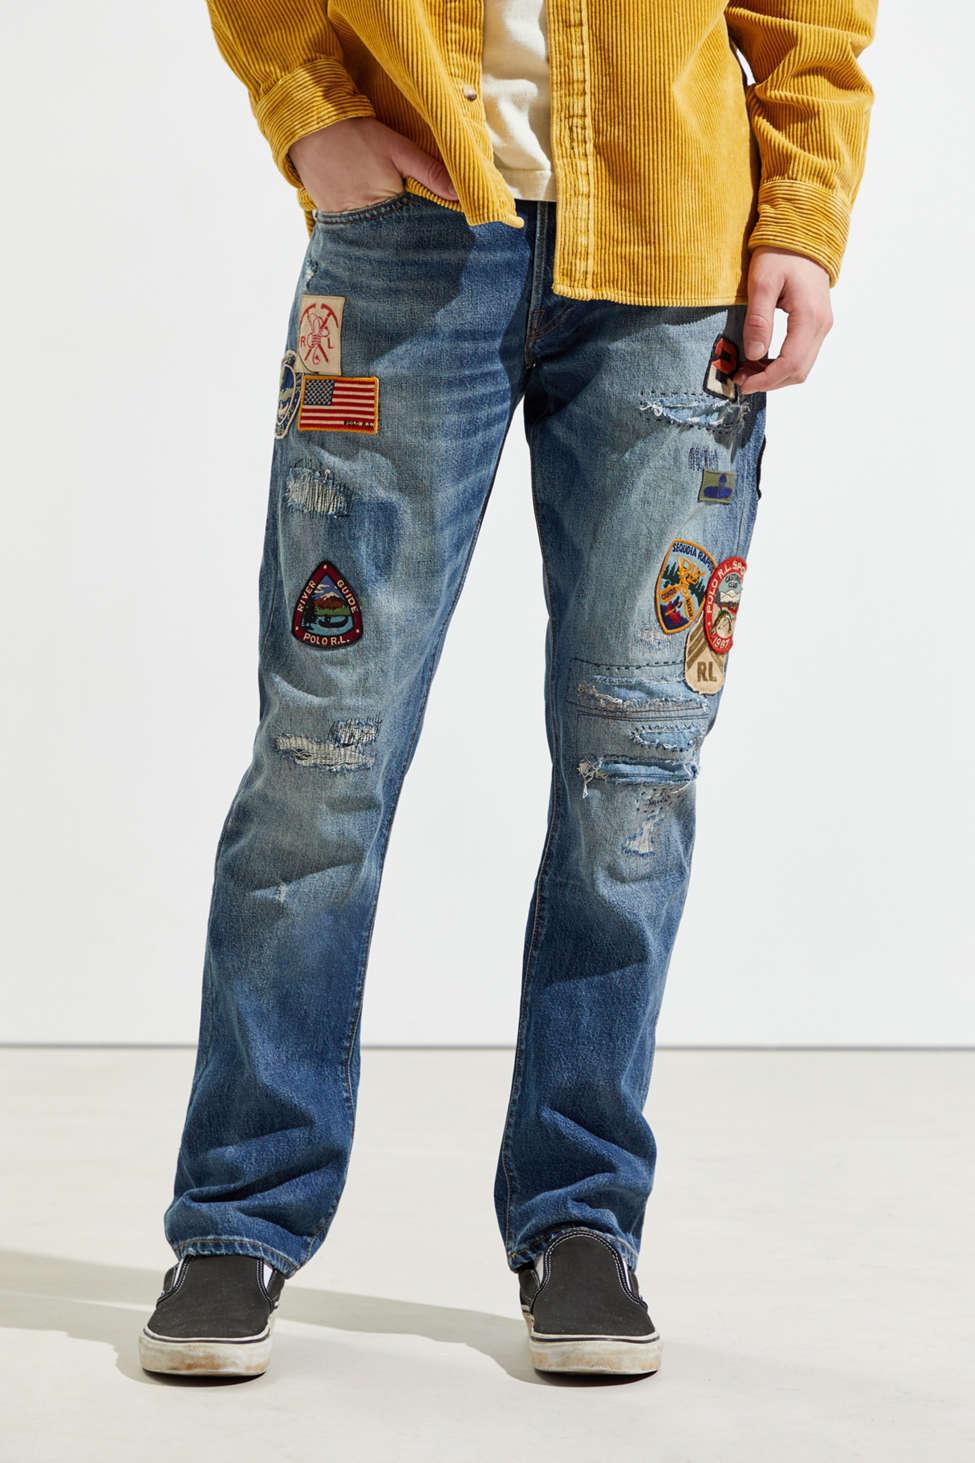 polo jeans with patches